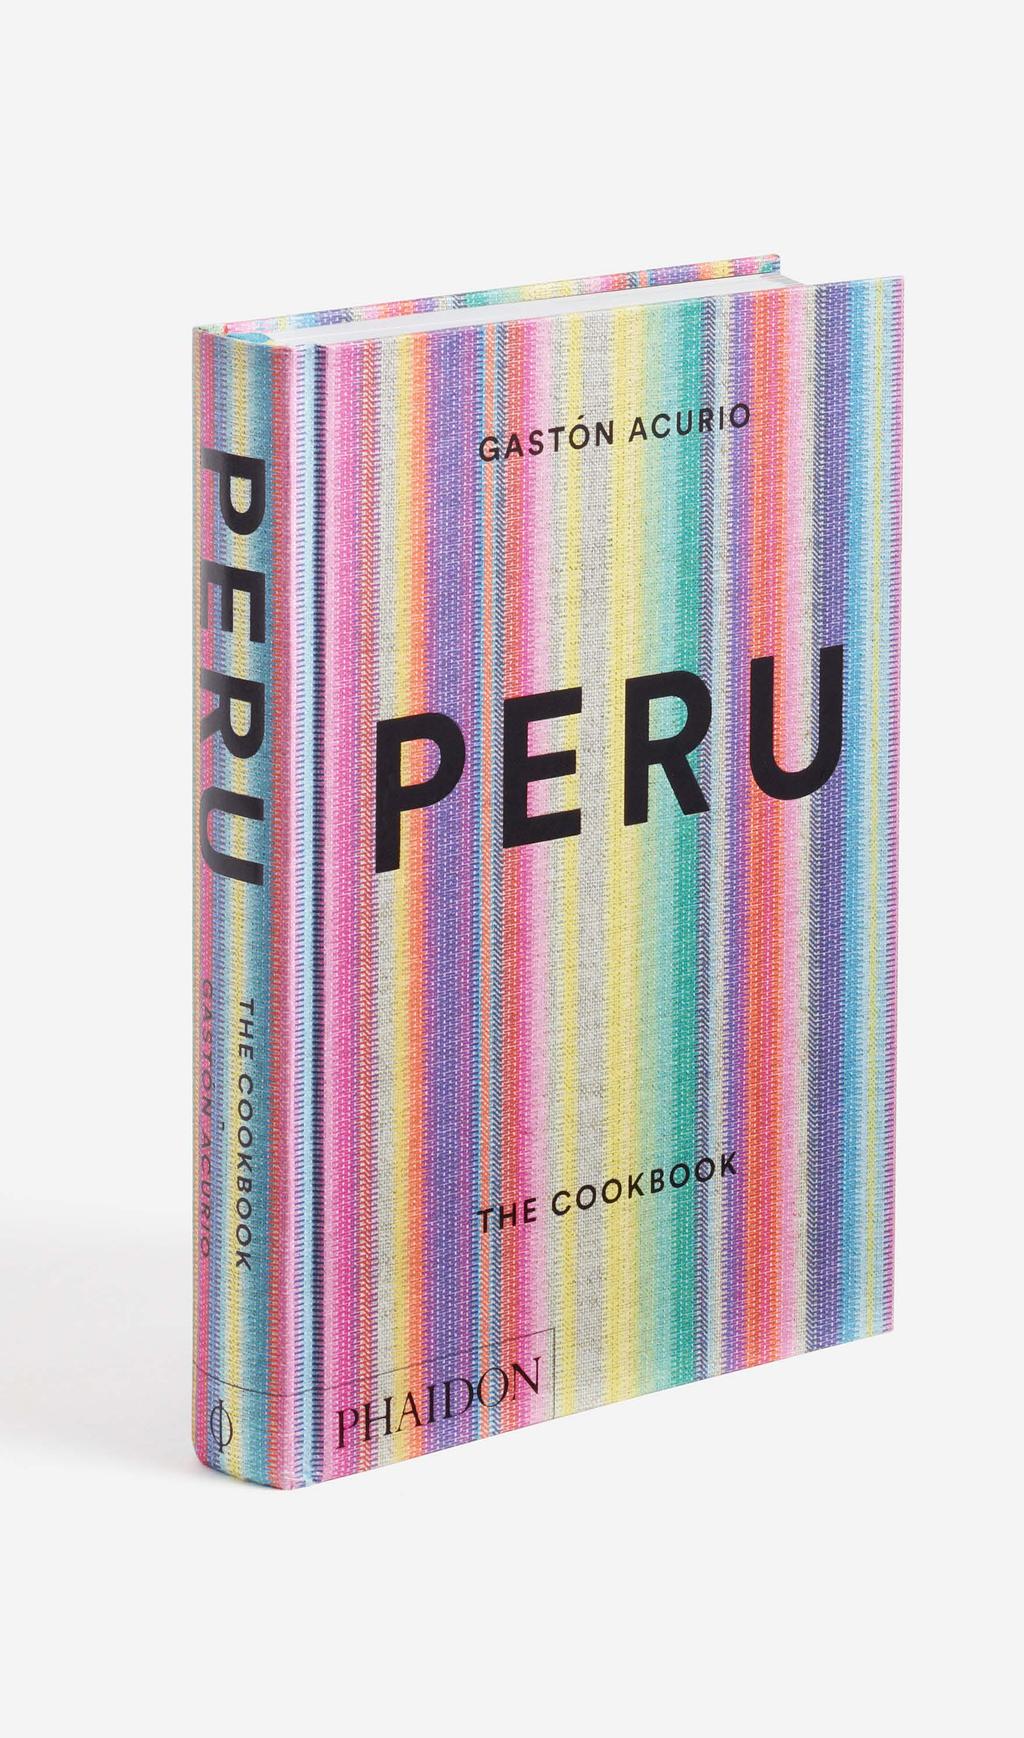 PERU: THE COOKBOOK The definitive Peruvian cookbook, featuring 500 traditional home cooking recipes from the country s most acclaimed and popular chef, Gastón Acurio.